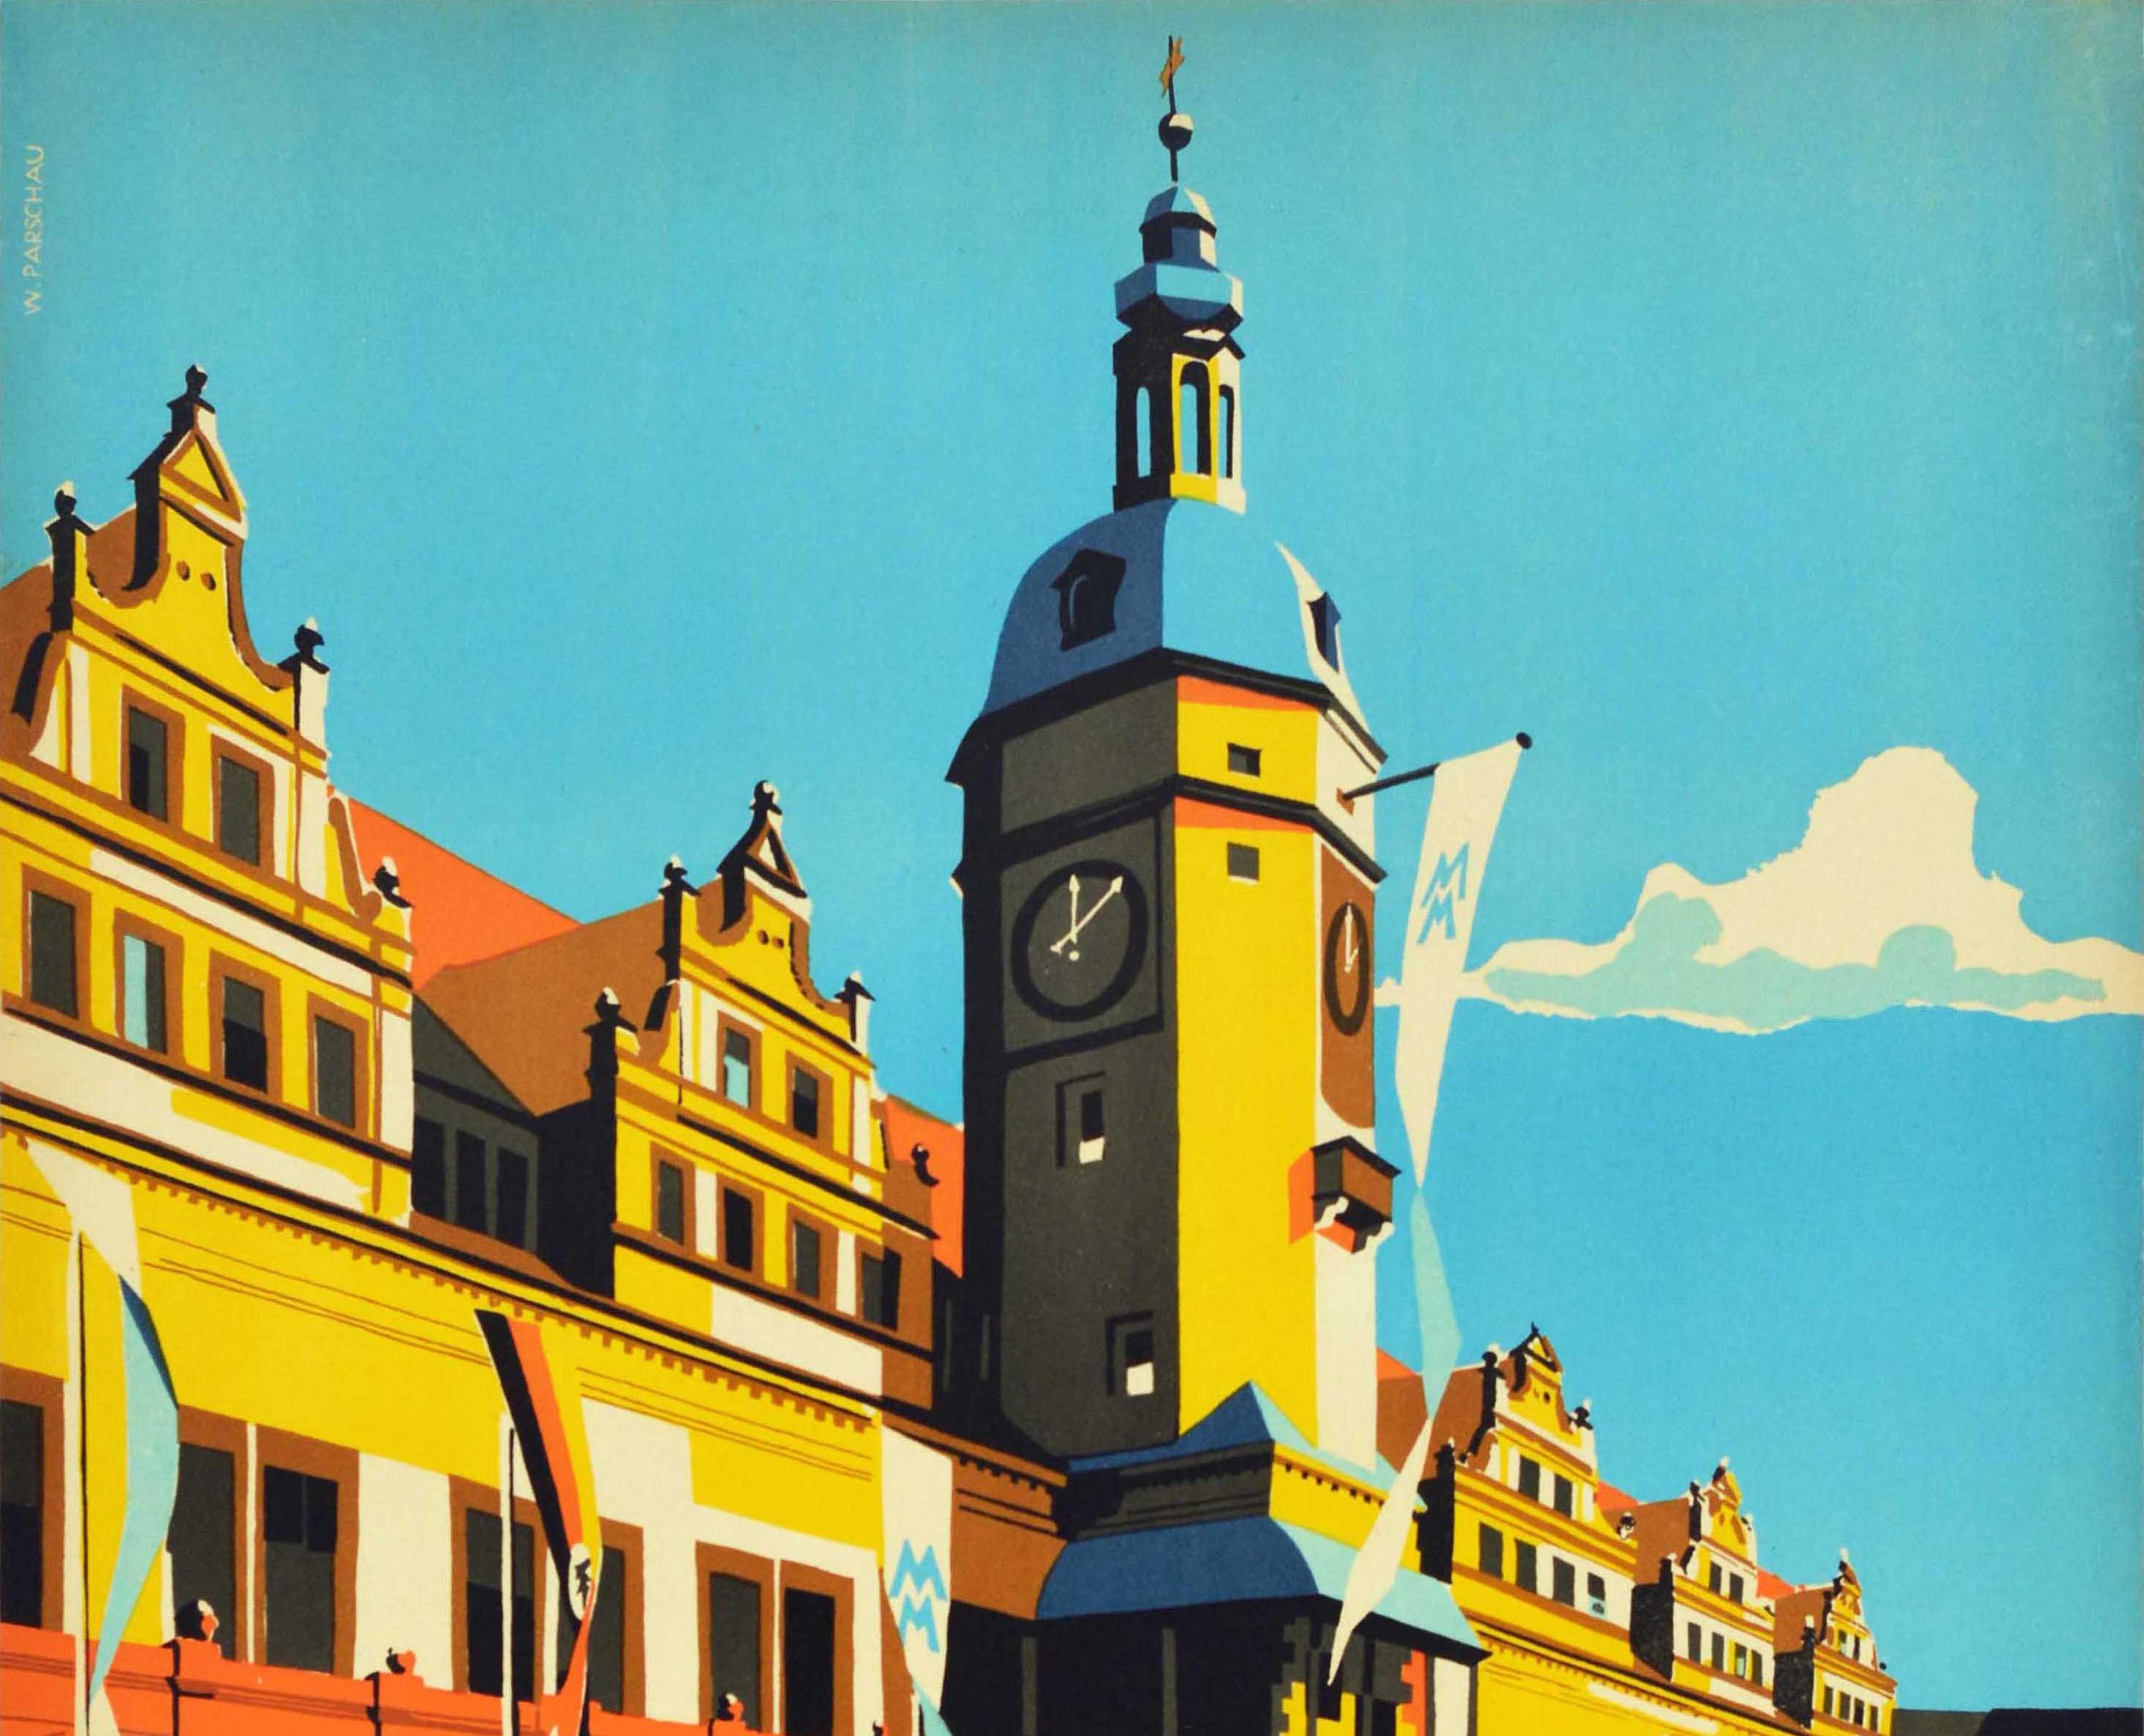 Original vintage travel poster for the Leipzig Trade Fair featuring a colourful image depicting people walking to the fair between parked cars in the foreground with flags of the event with the blue MM initials and of the East German Democratic